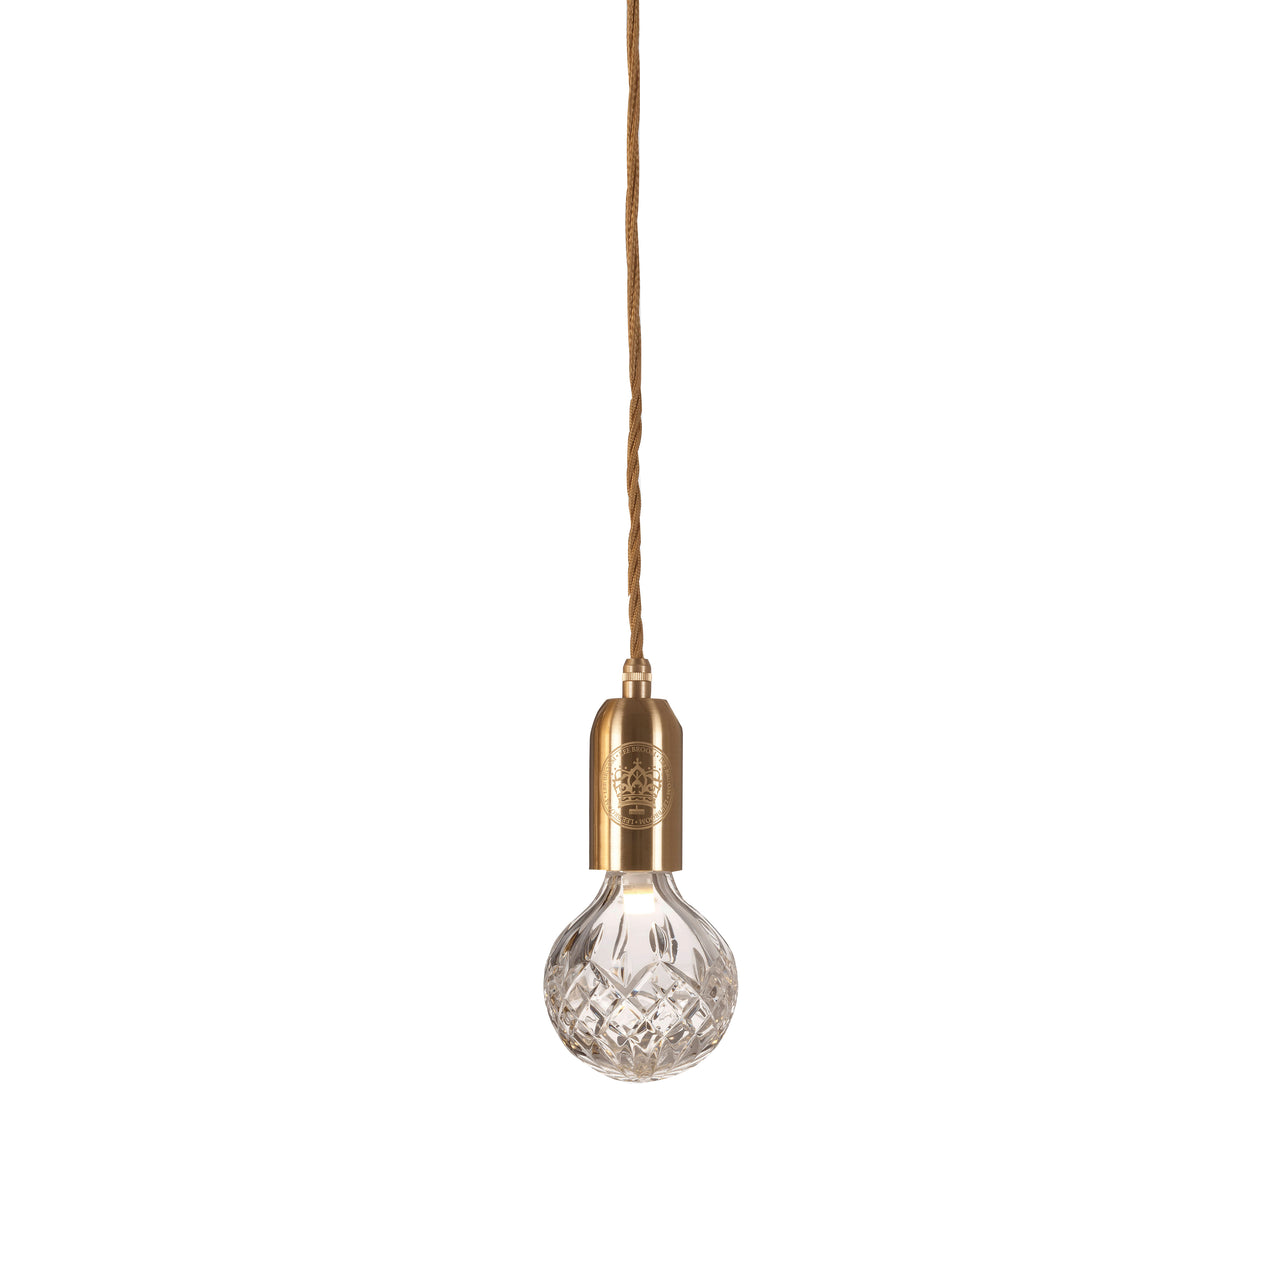 Crystal Bulb + Pendant: Bulb + Brushed Brass Fitting + Clear